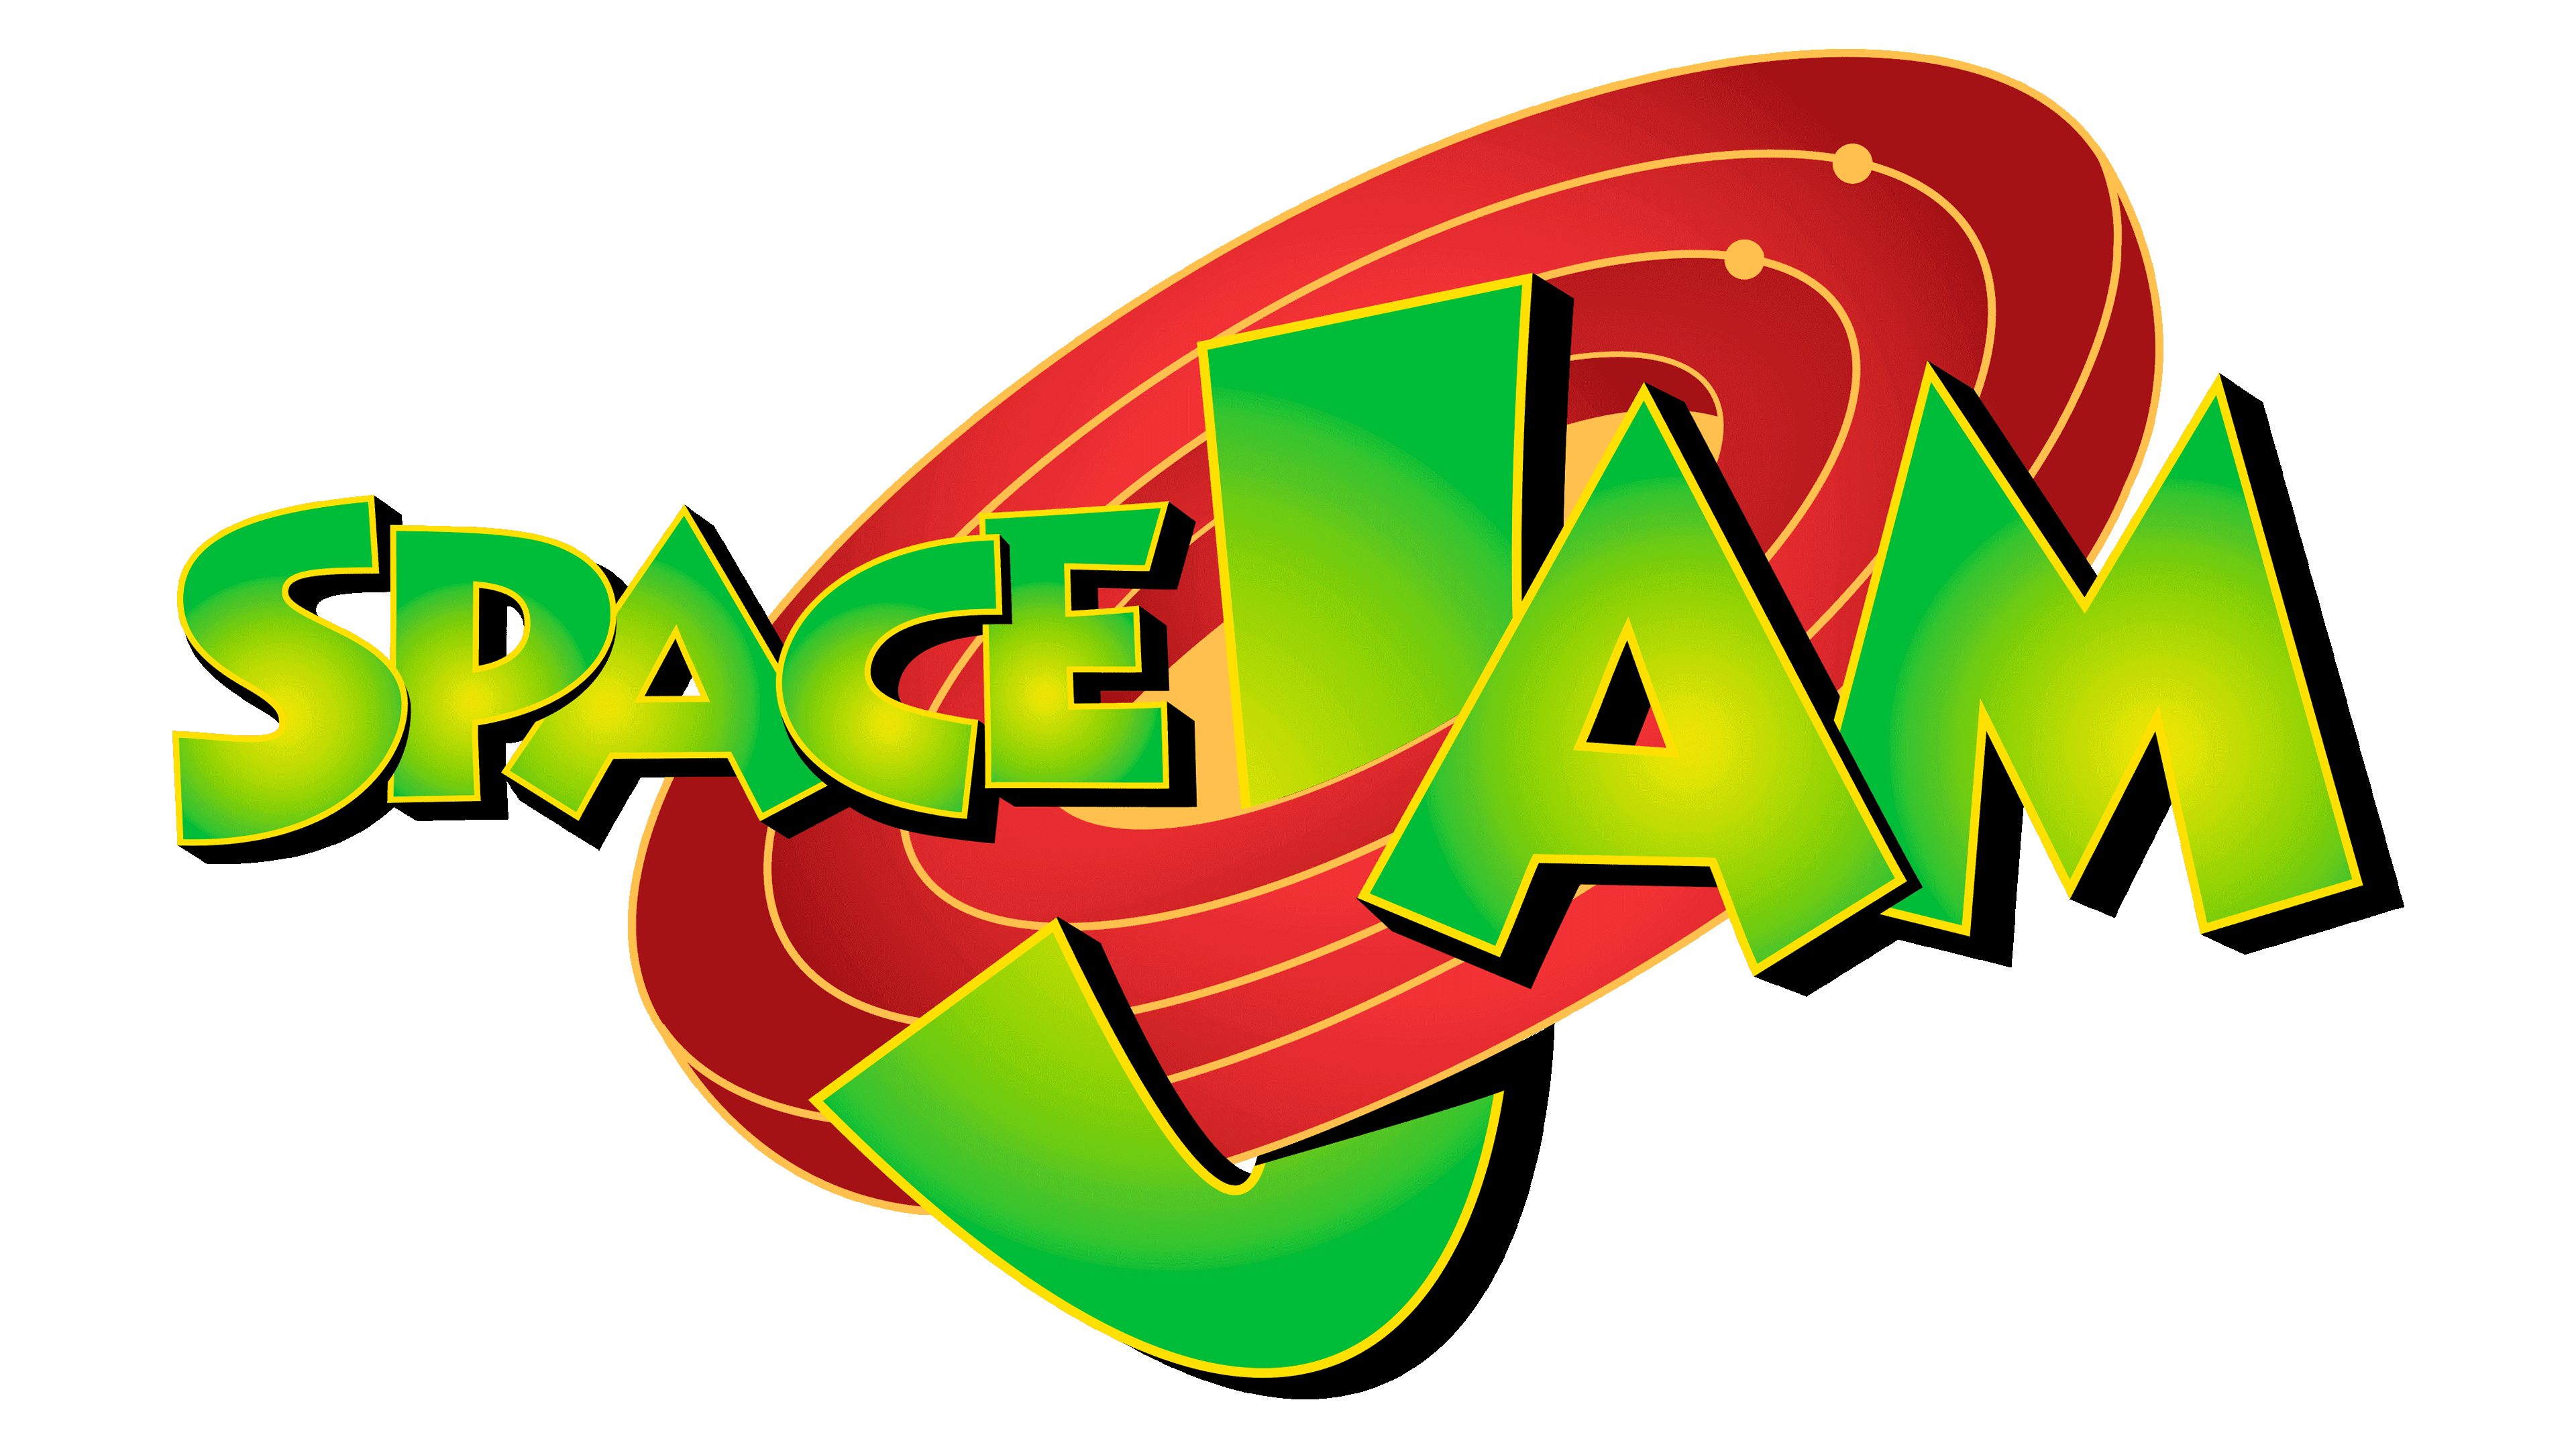 space-jam-logo-and-symbol-meaning-history-png-brand